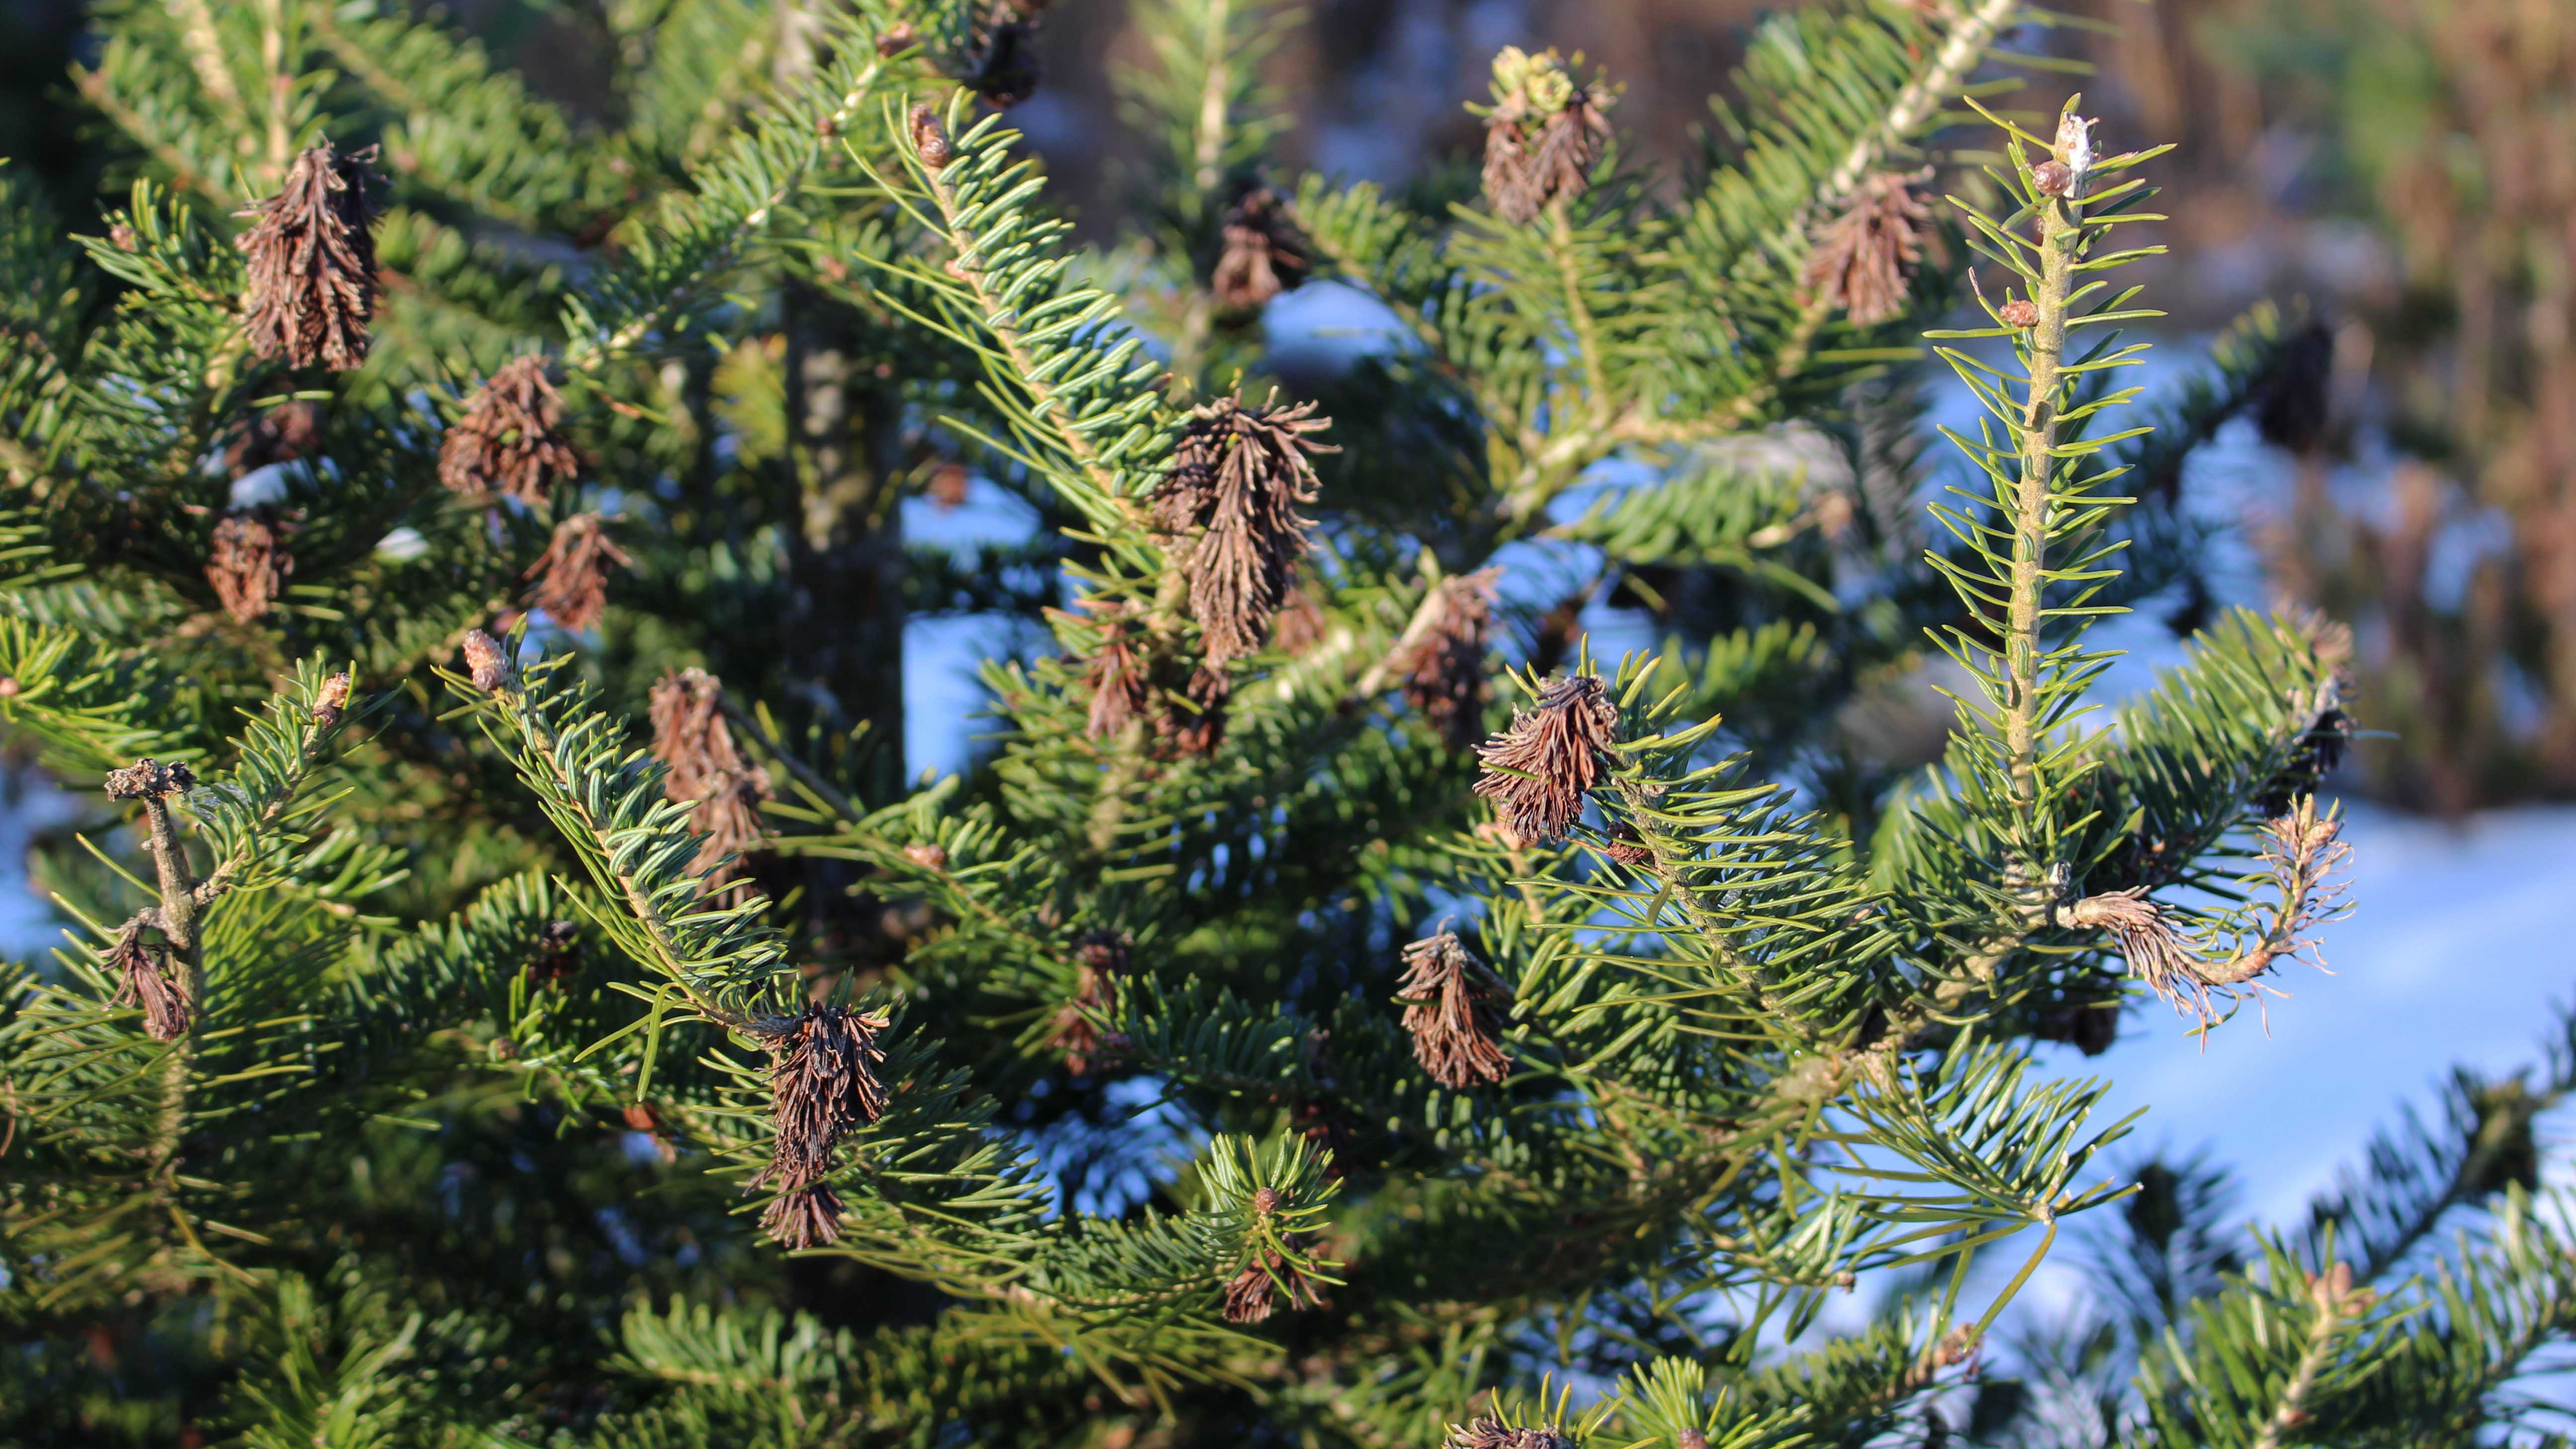 The tips of the balsam firs are evidence of damage from the frost. 